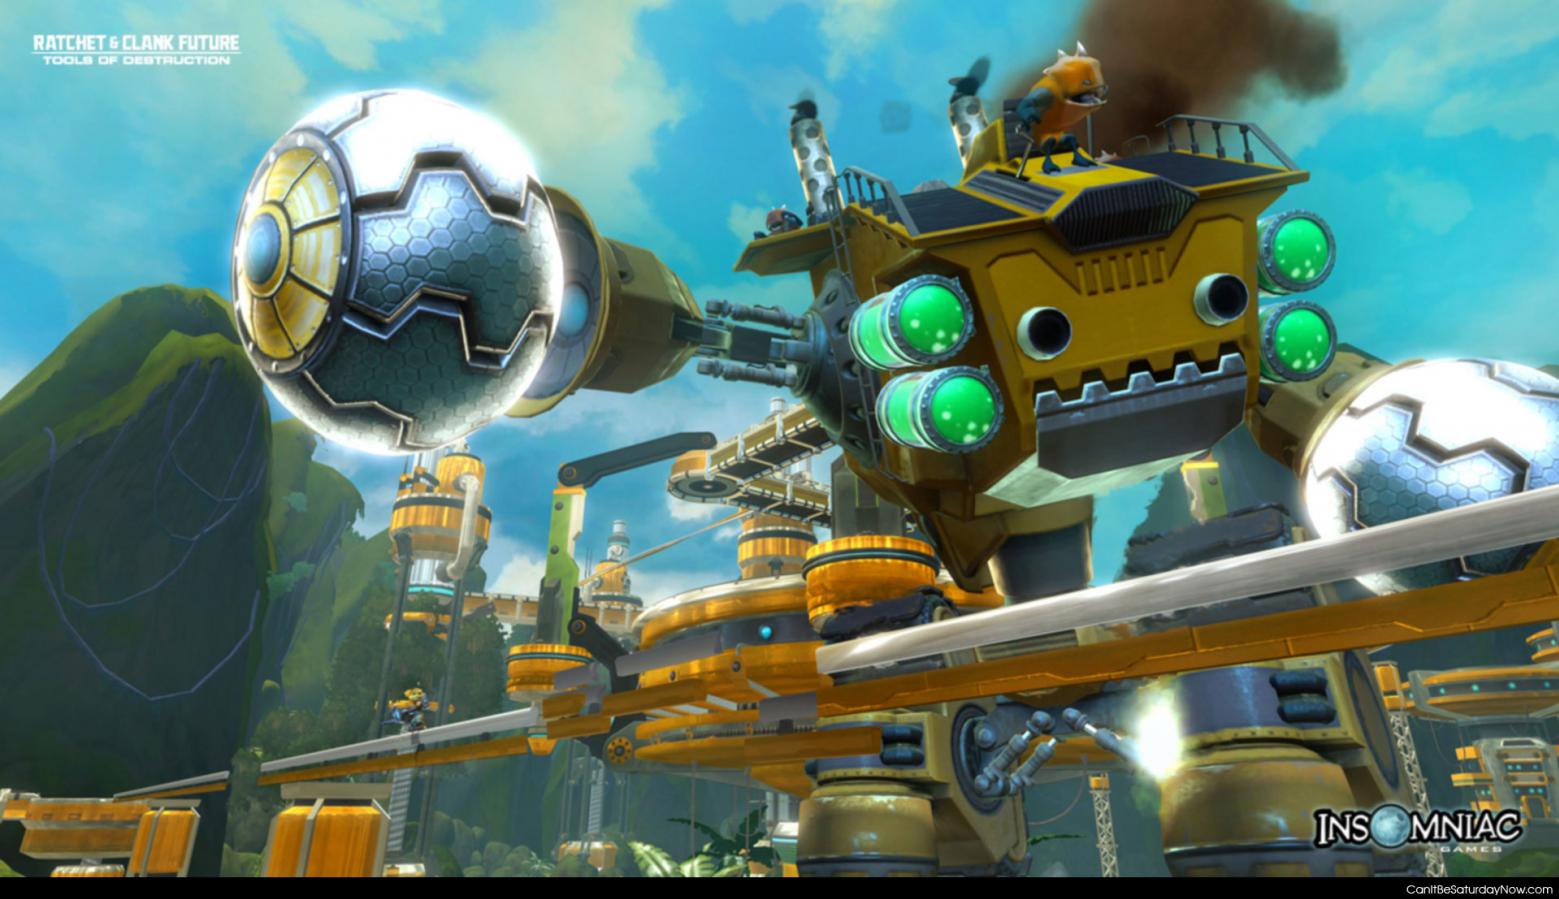 Ratchet clank future - Ratchet and Clank Future